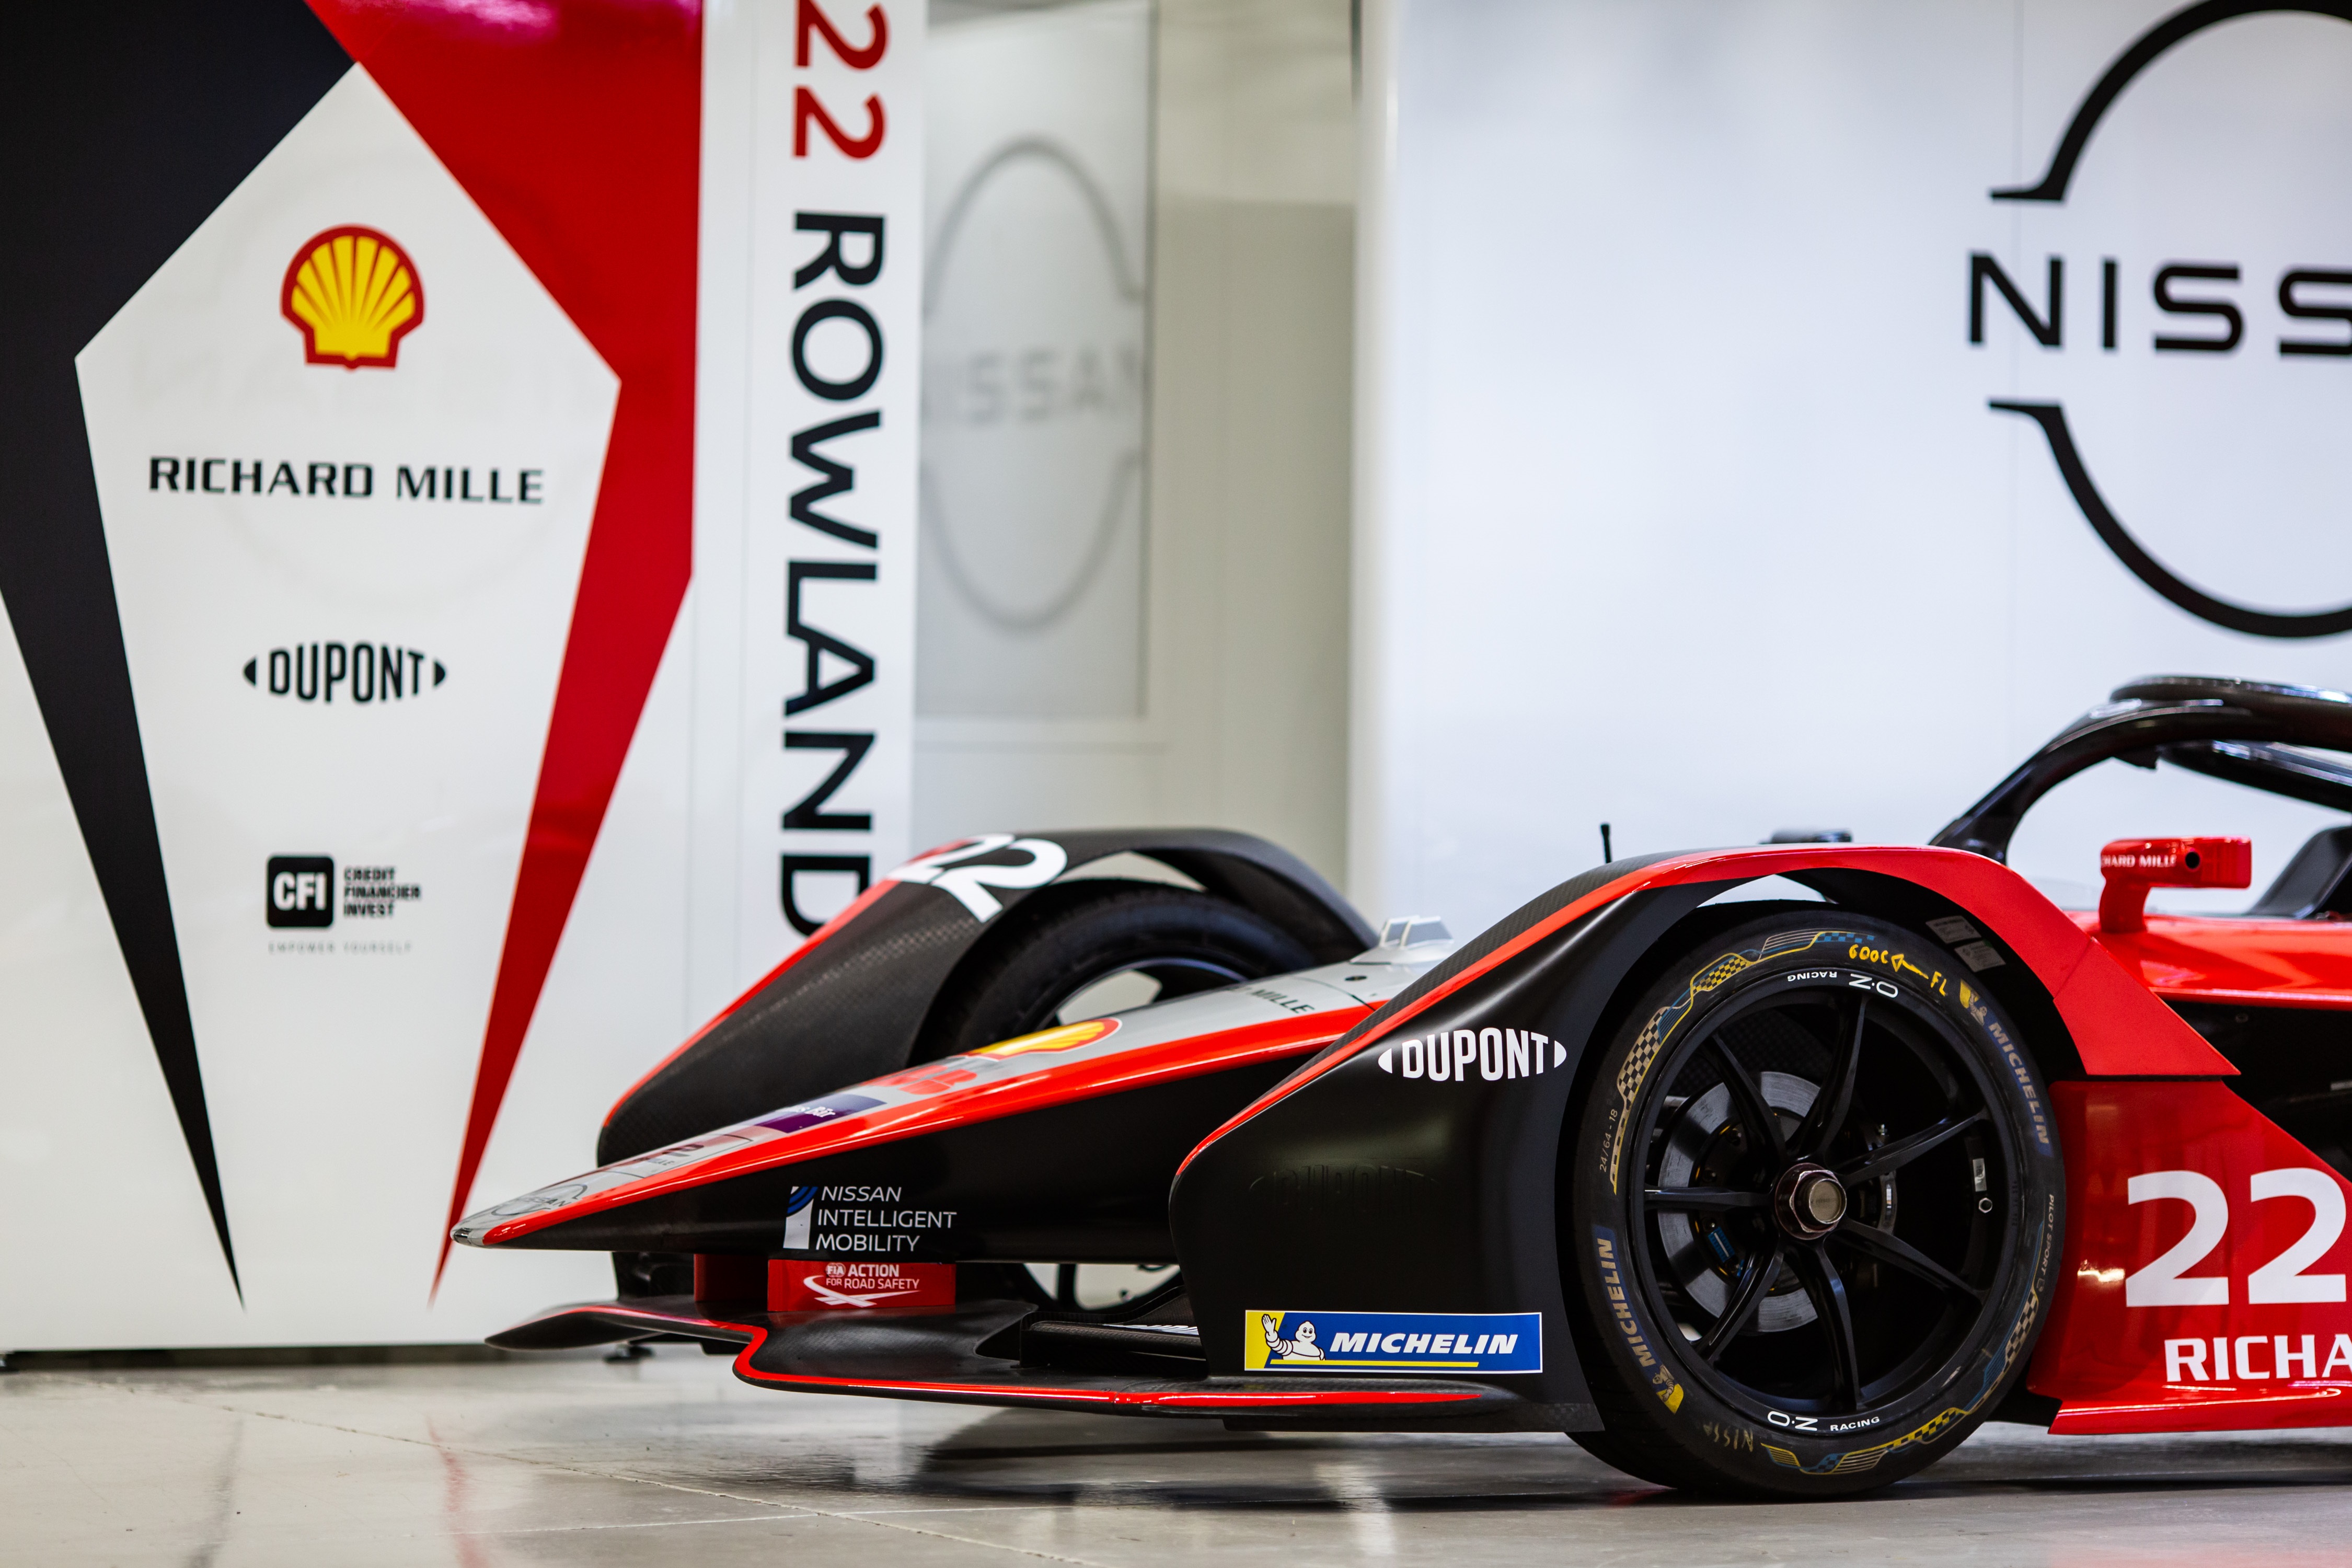 DuPont has partnered with Nissan’s Formula E team to help improve electric motor performance and battery safety.